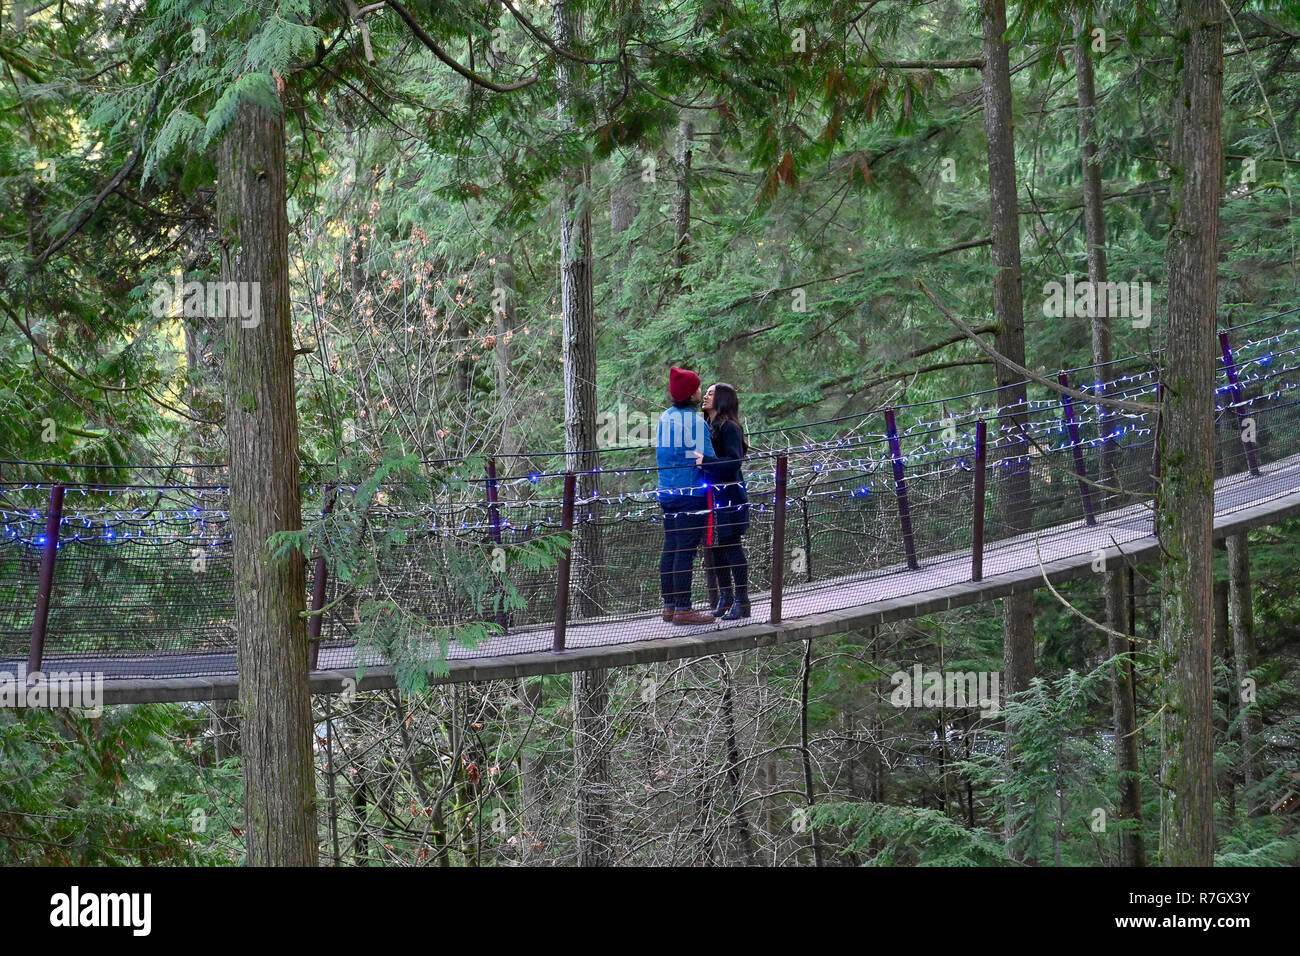 Couple being affectionate at Treetops Adventure and Canyon Lights, Capilano Suspension Bridge Park, North Vancouver, British Columbia, Canada Stock Photo